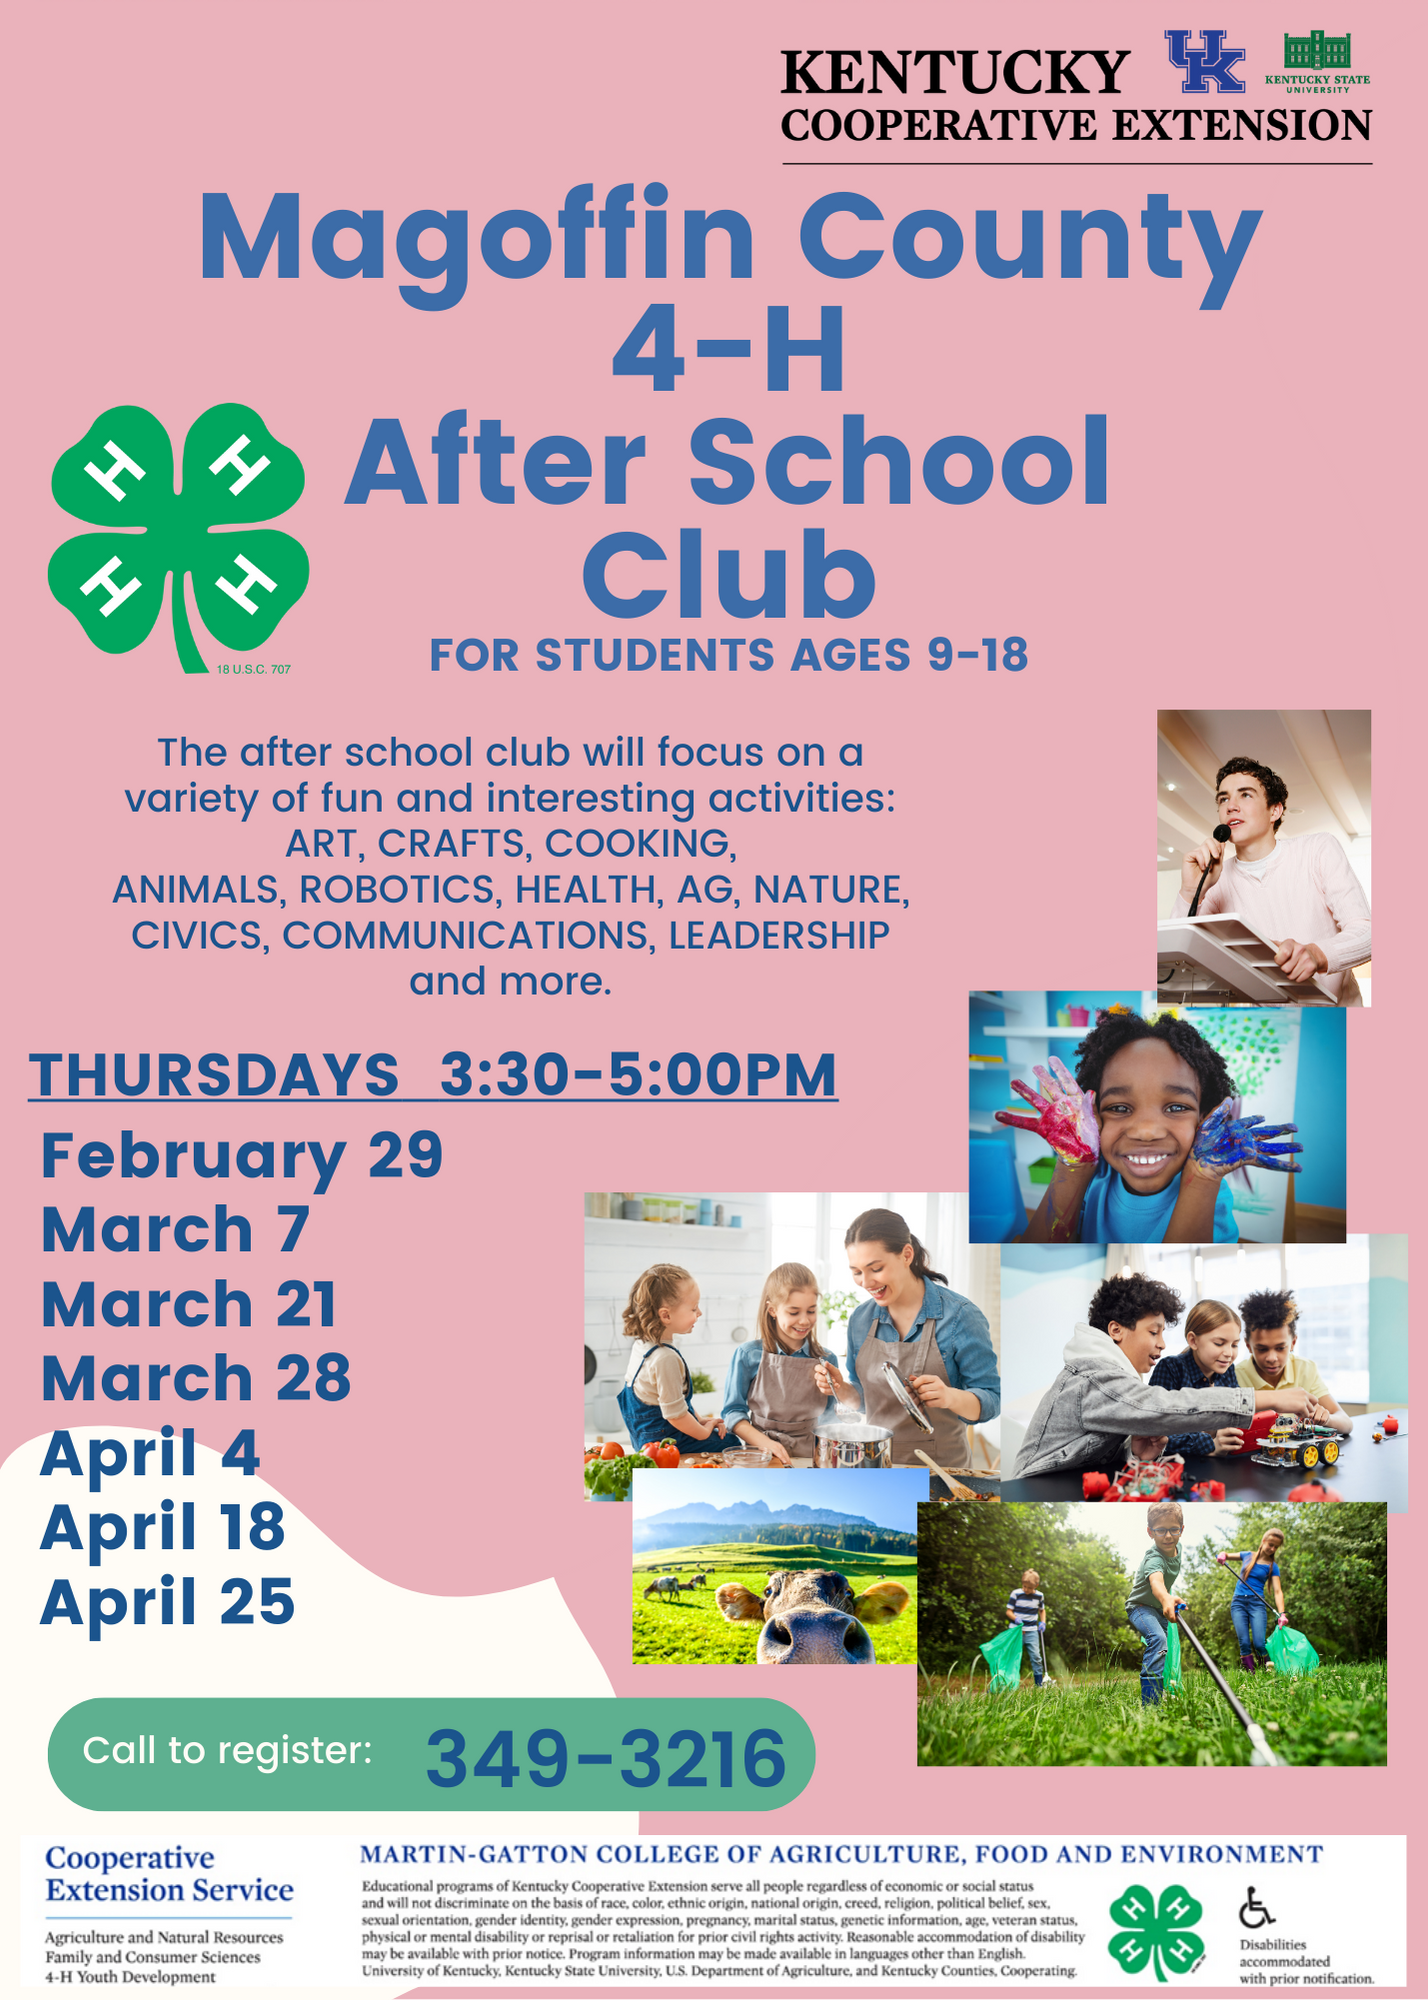 Magoffin County 4-H After School Club schedule and time